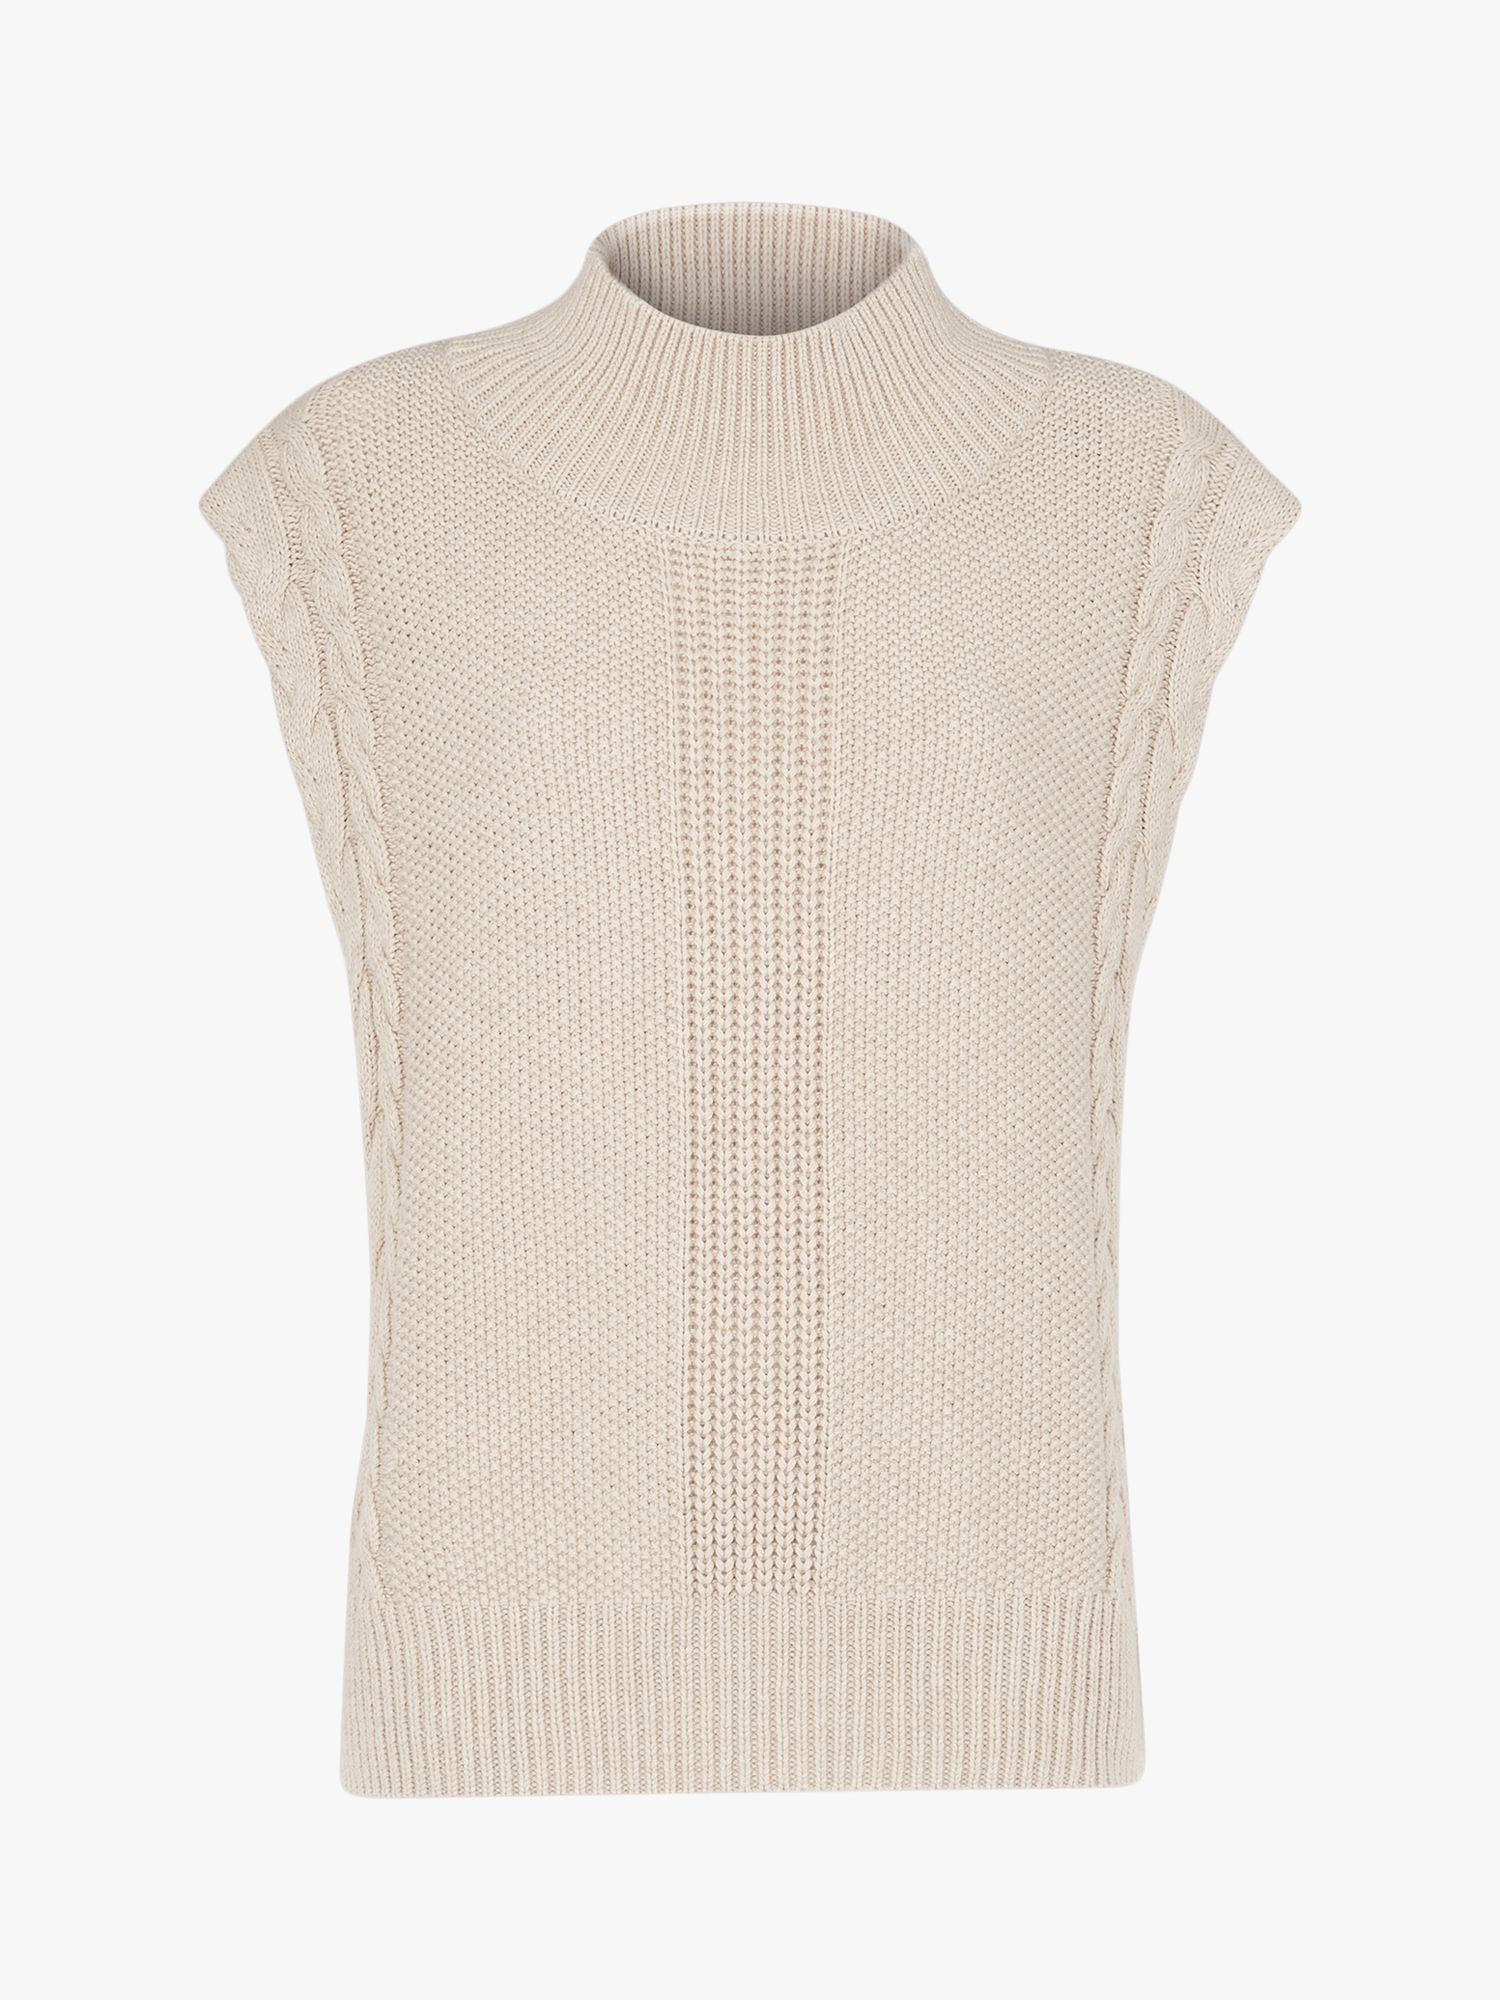 Whistles Sleeveless Cable Knit Jumper, Oatmeal at John Lewis & Partners